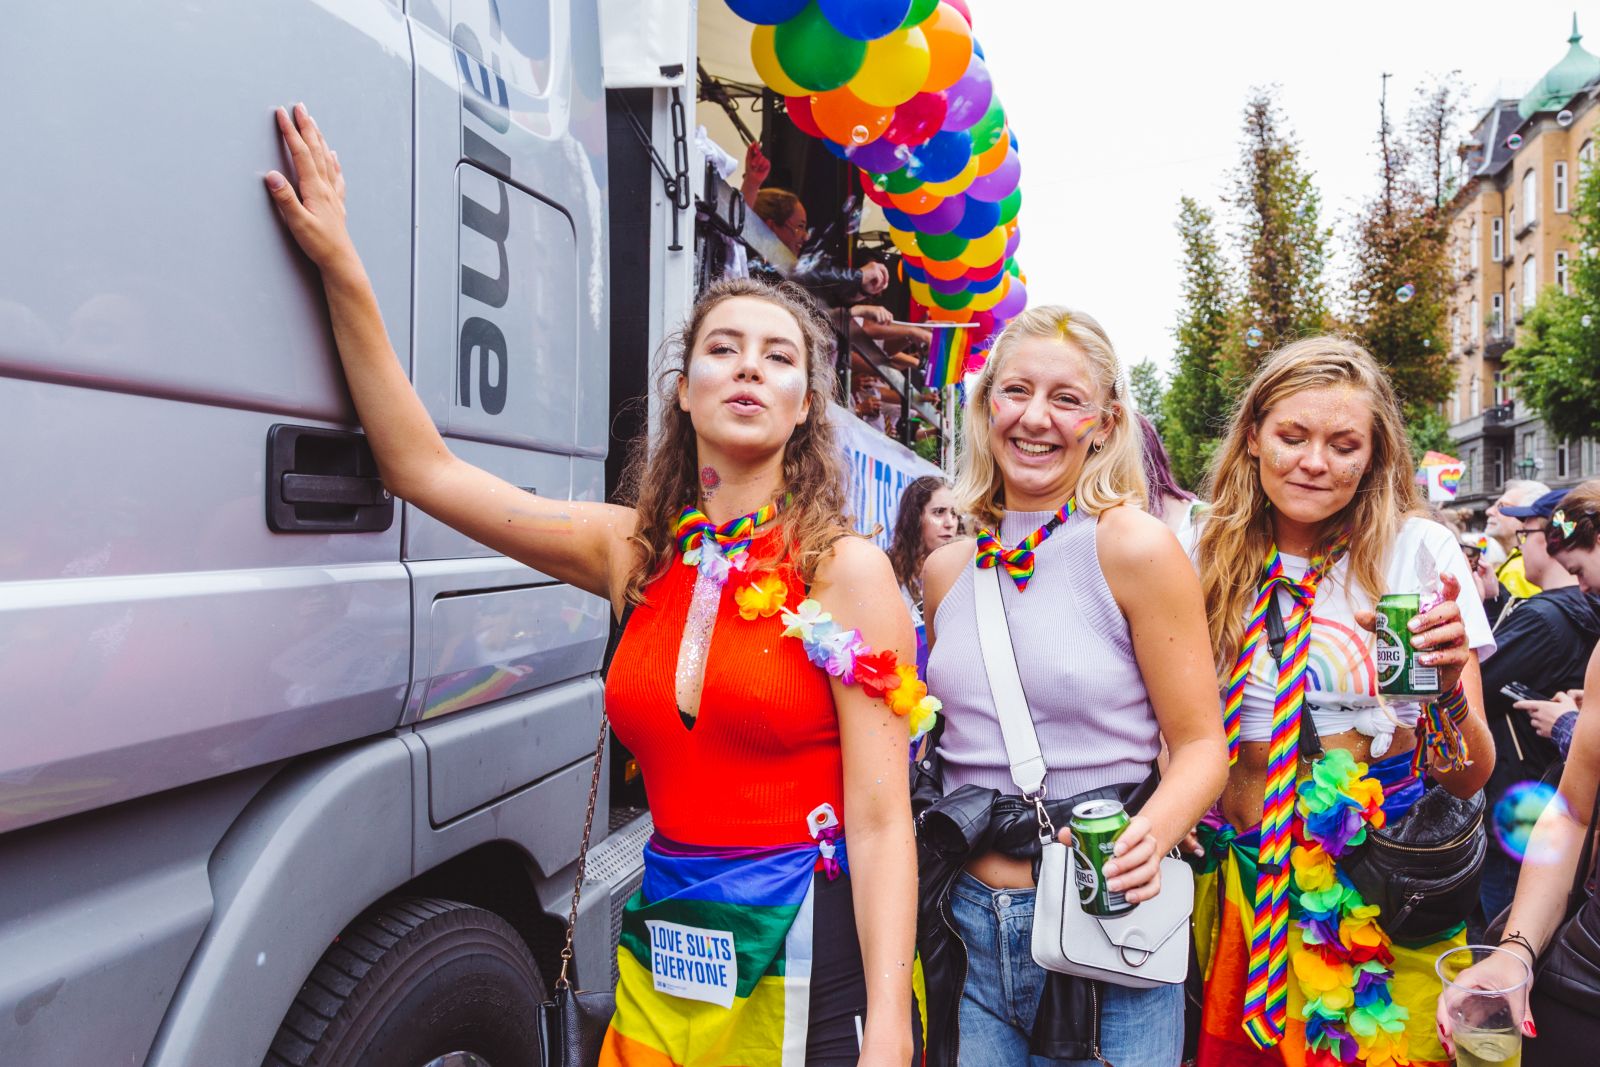 Fabulous Gallery Cbs Joined Copenhagen Pride Parade For The Third Time It Was Quite A Party